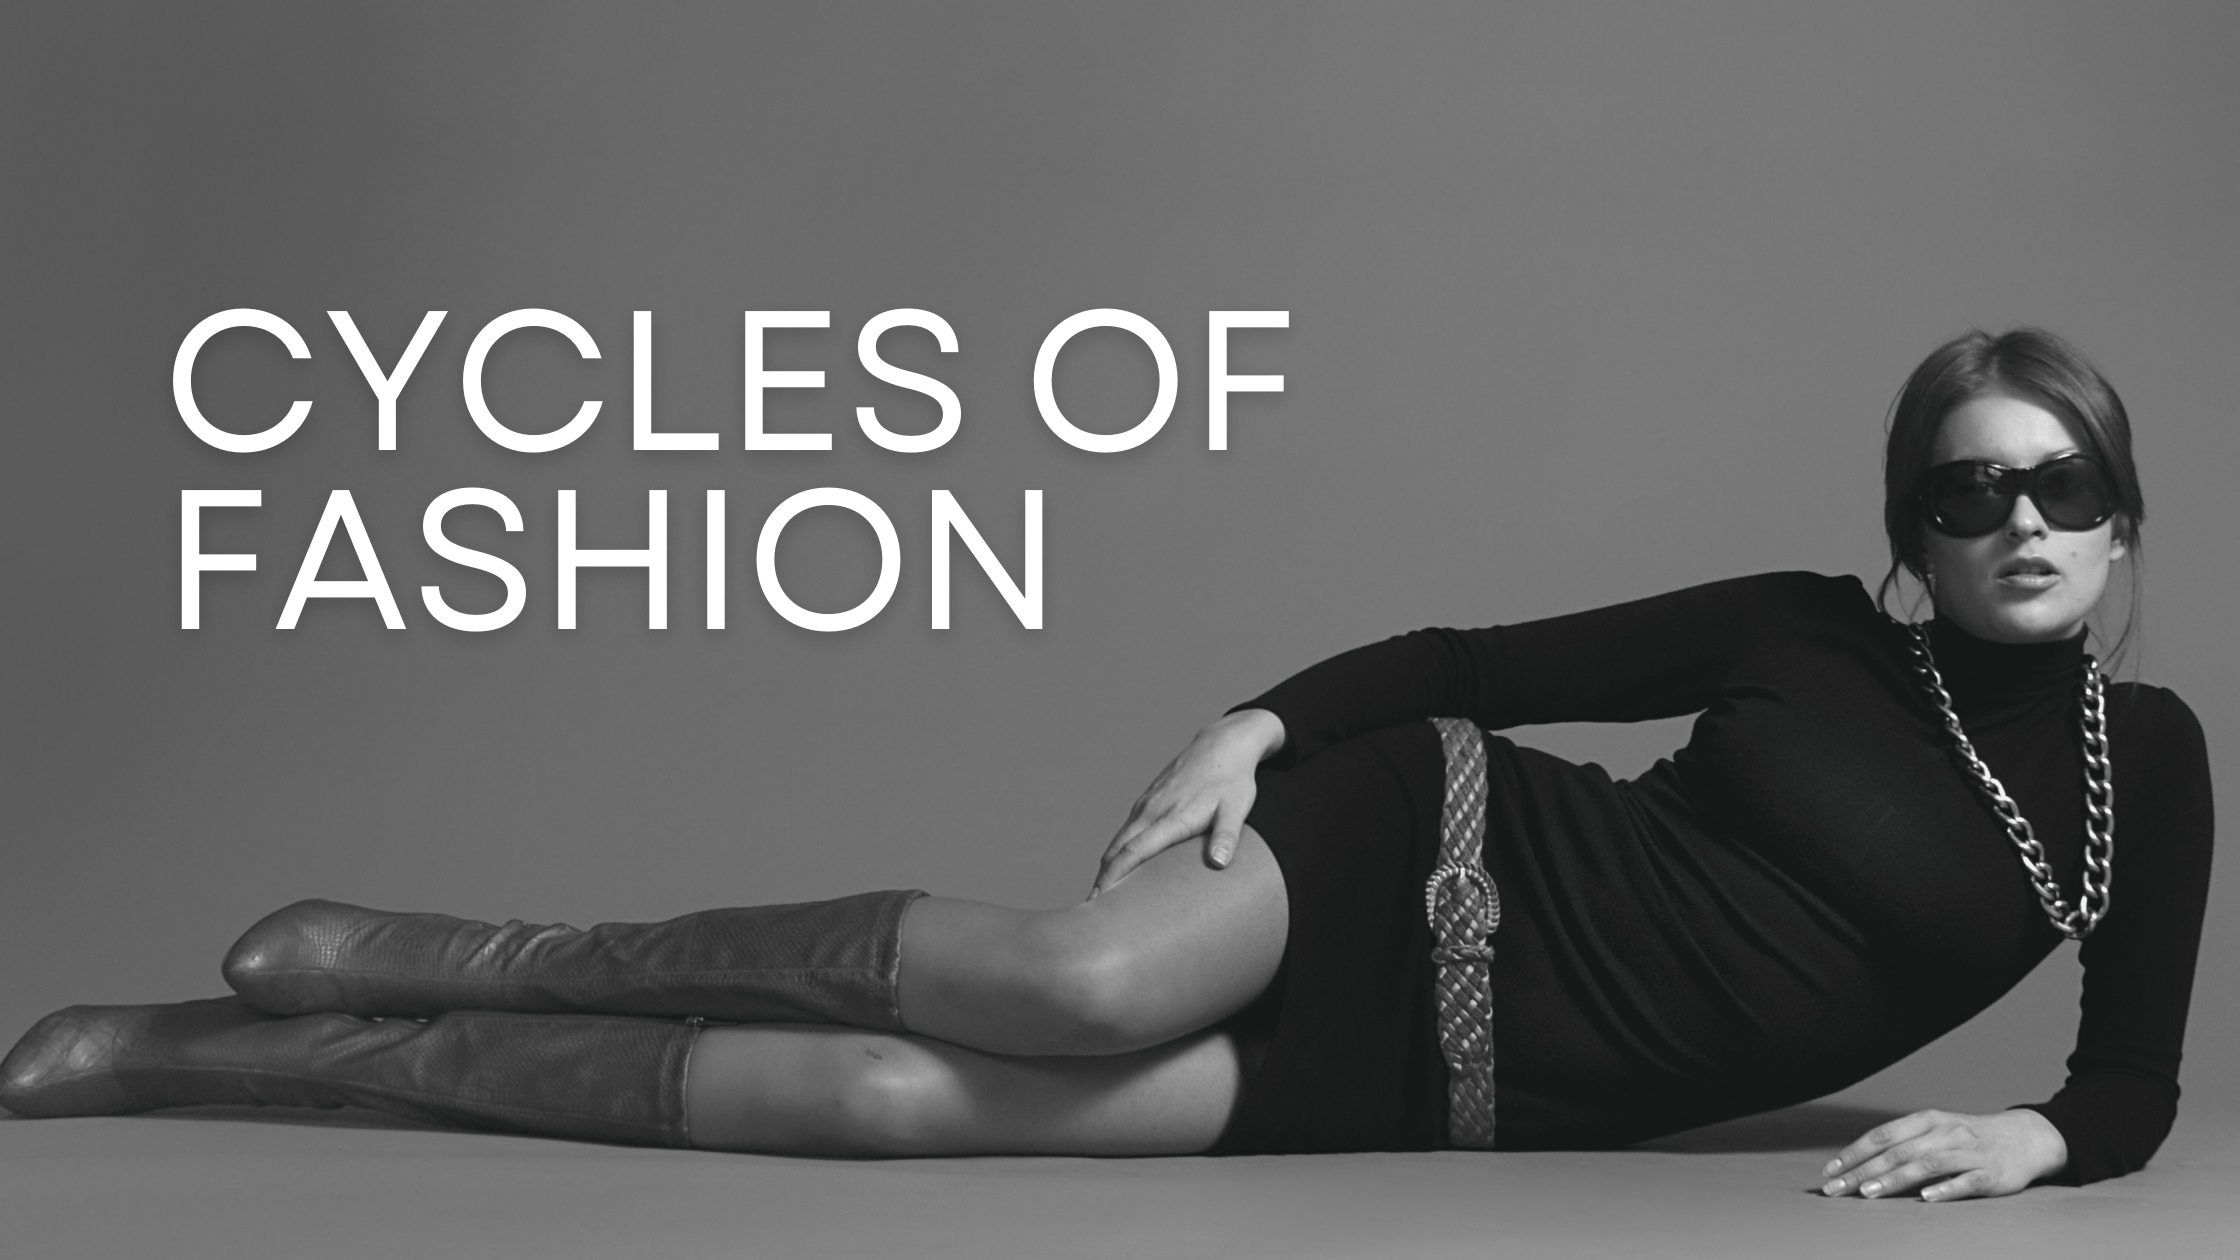 Cycles of fashion